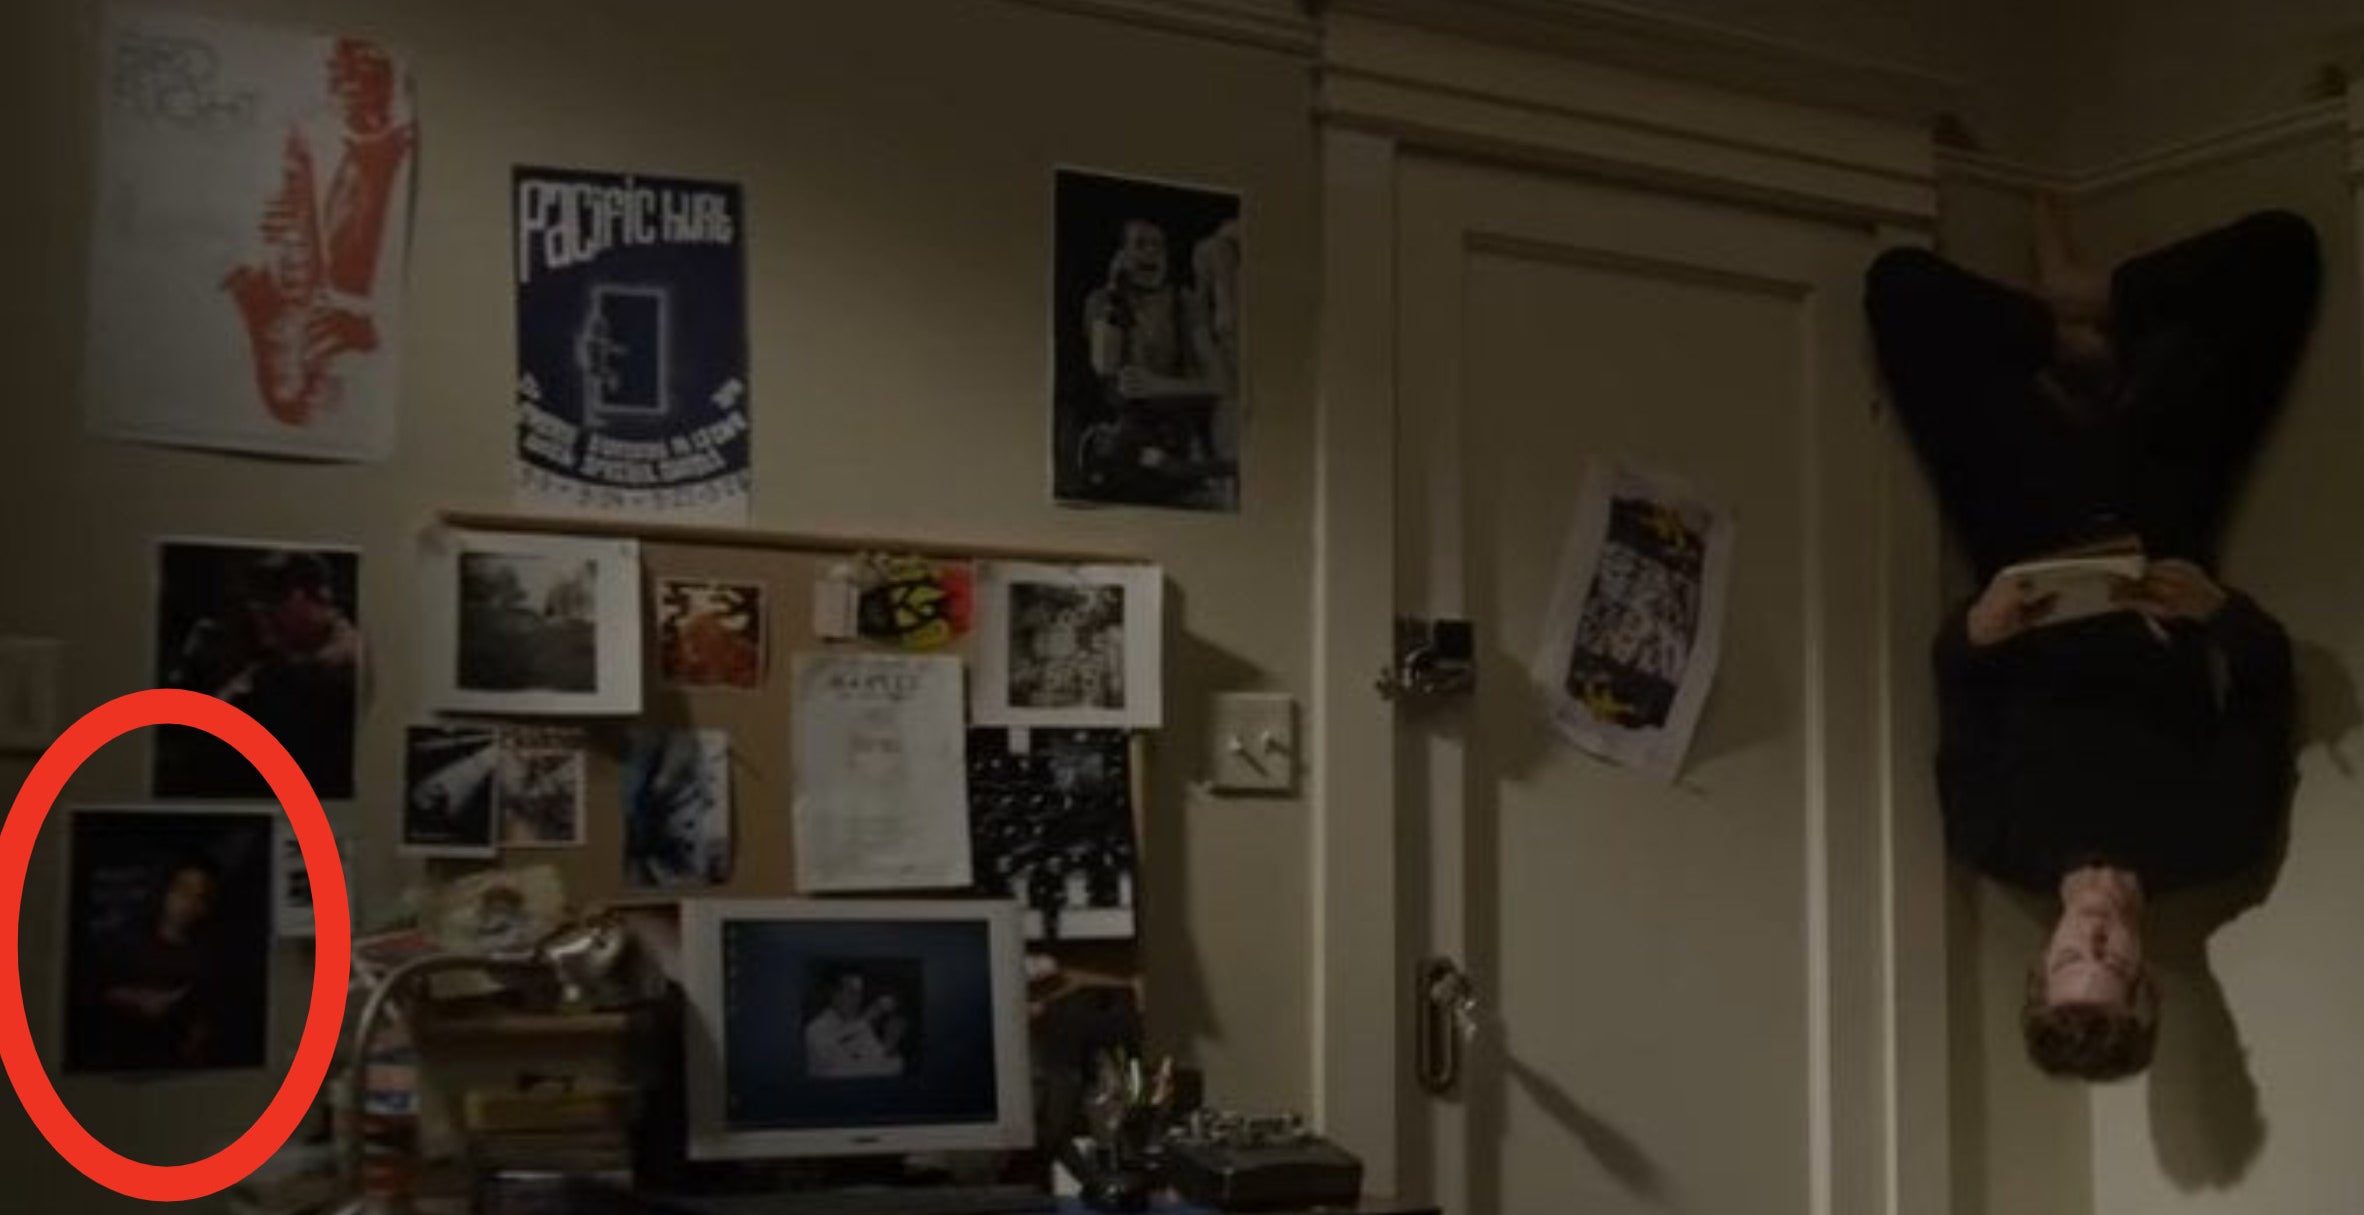 Peter hanging upside down from the wall in his room with a notebook in &quot;The Amazing Spider-Man&quot;